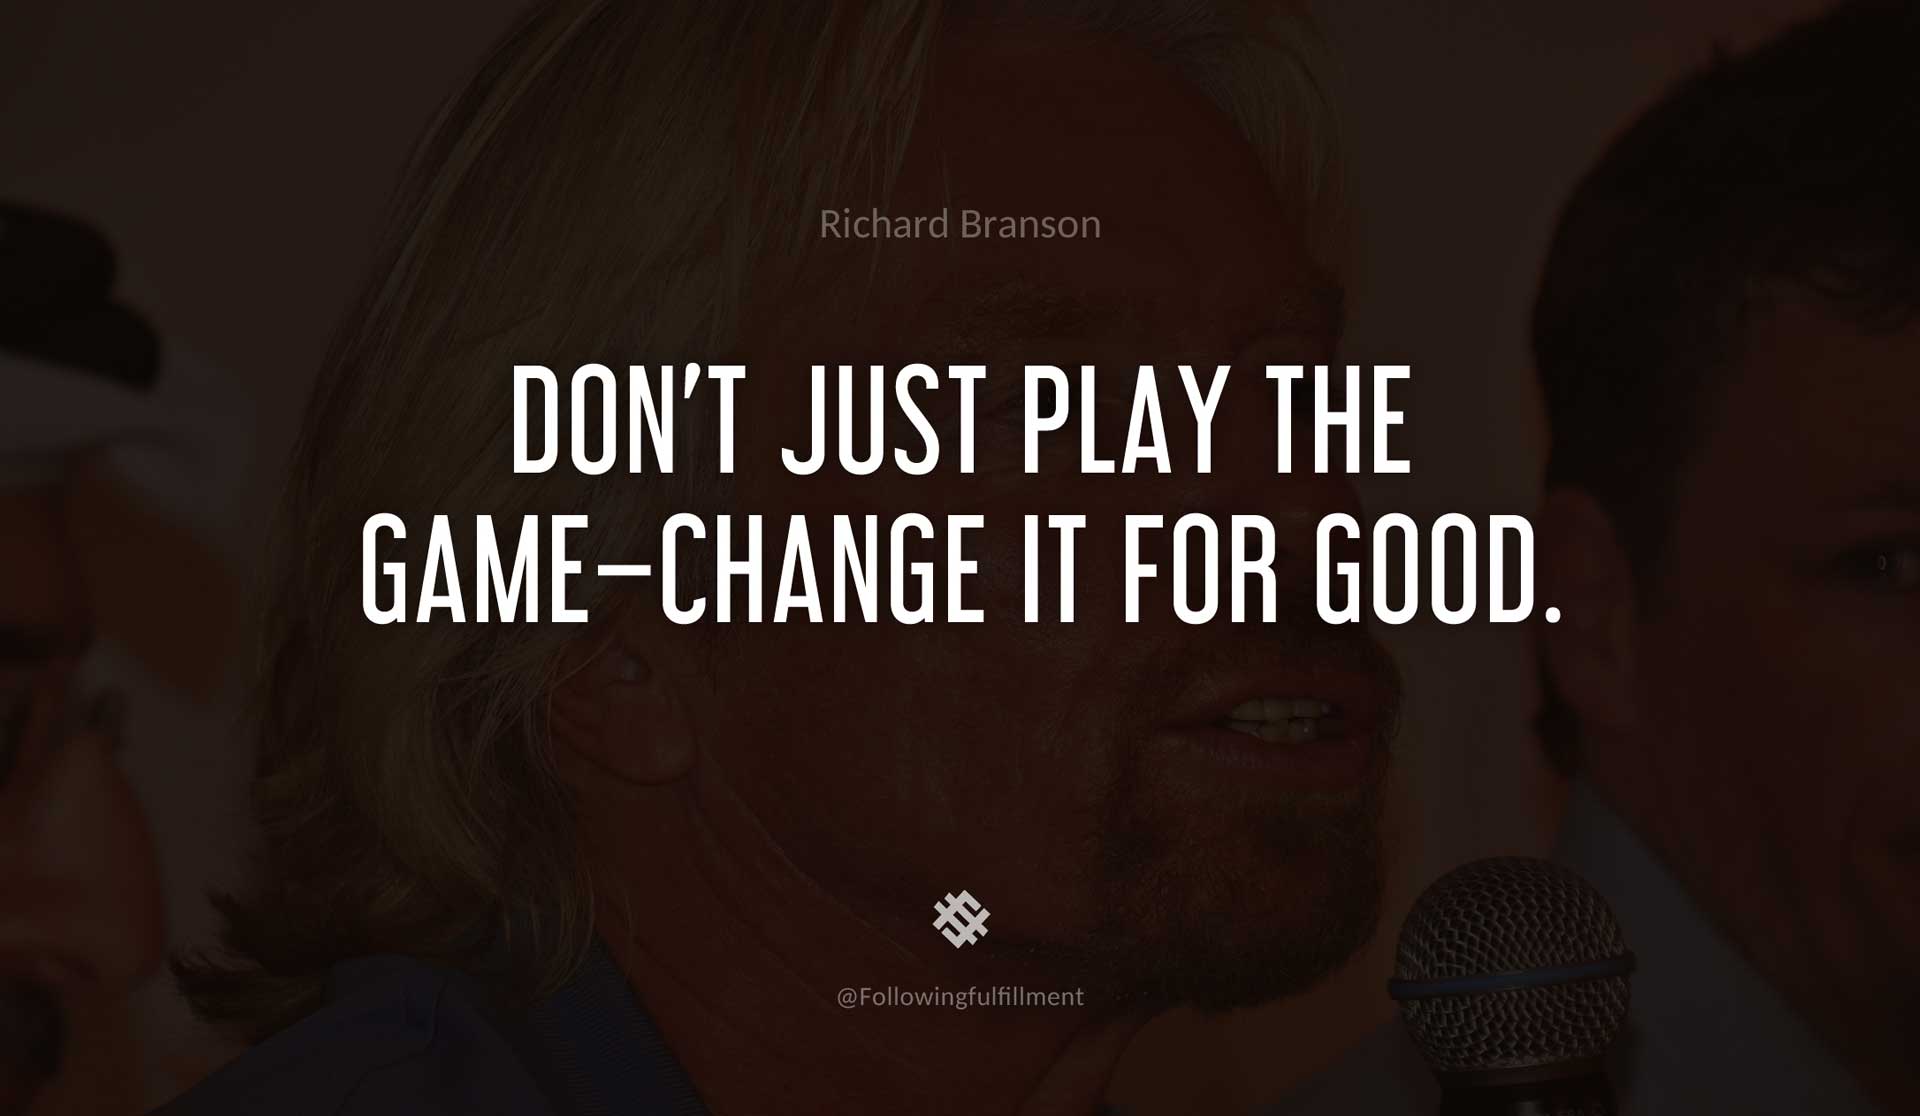 Don't-just-play-the-game-change-it-for-good.--RICHARD-BRANSON-Quote.jpg